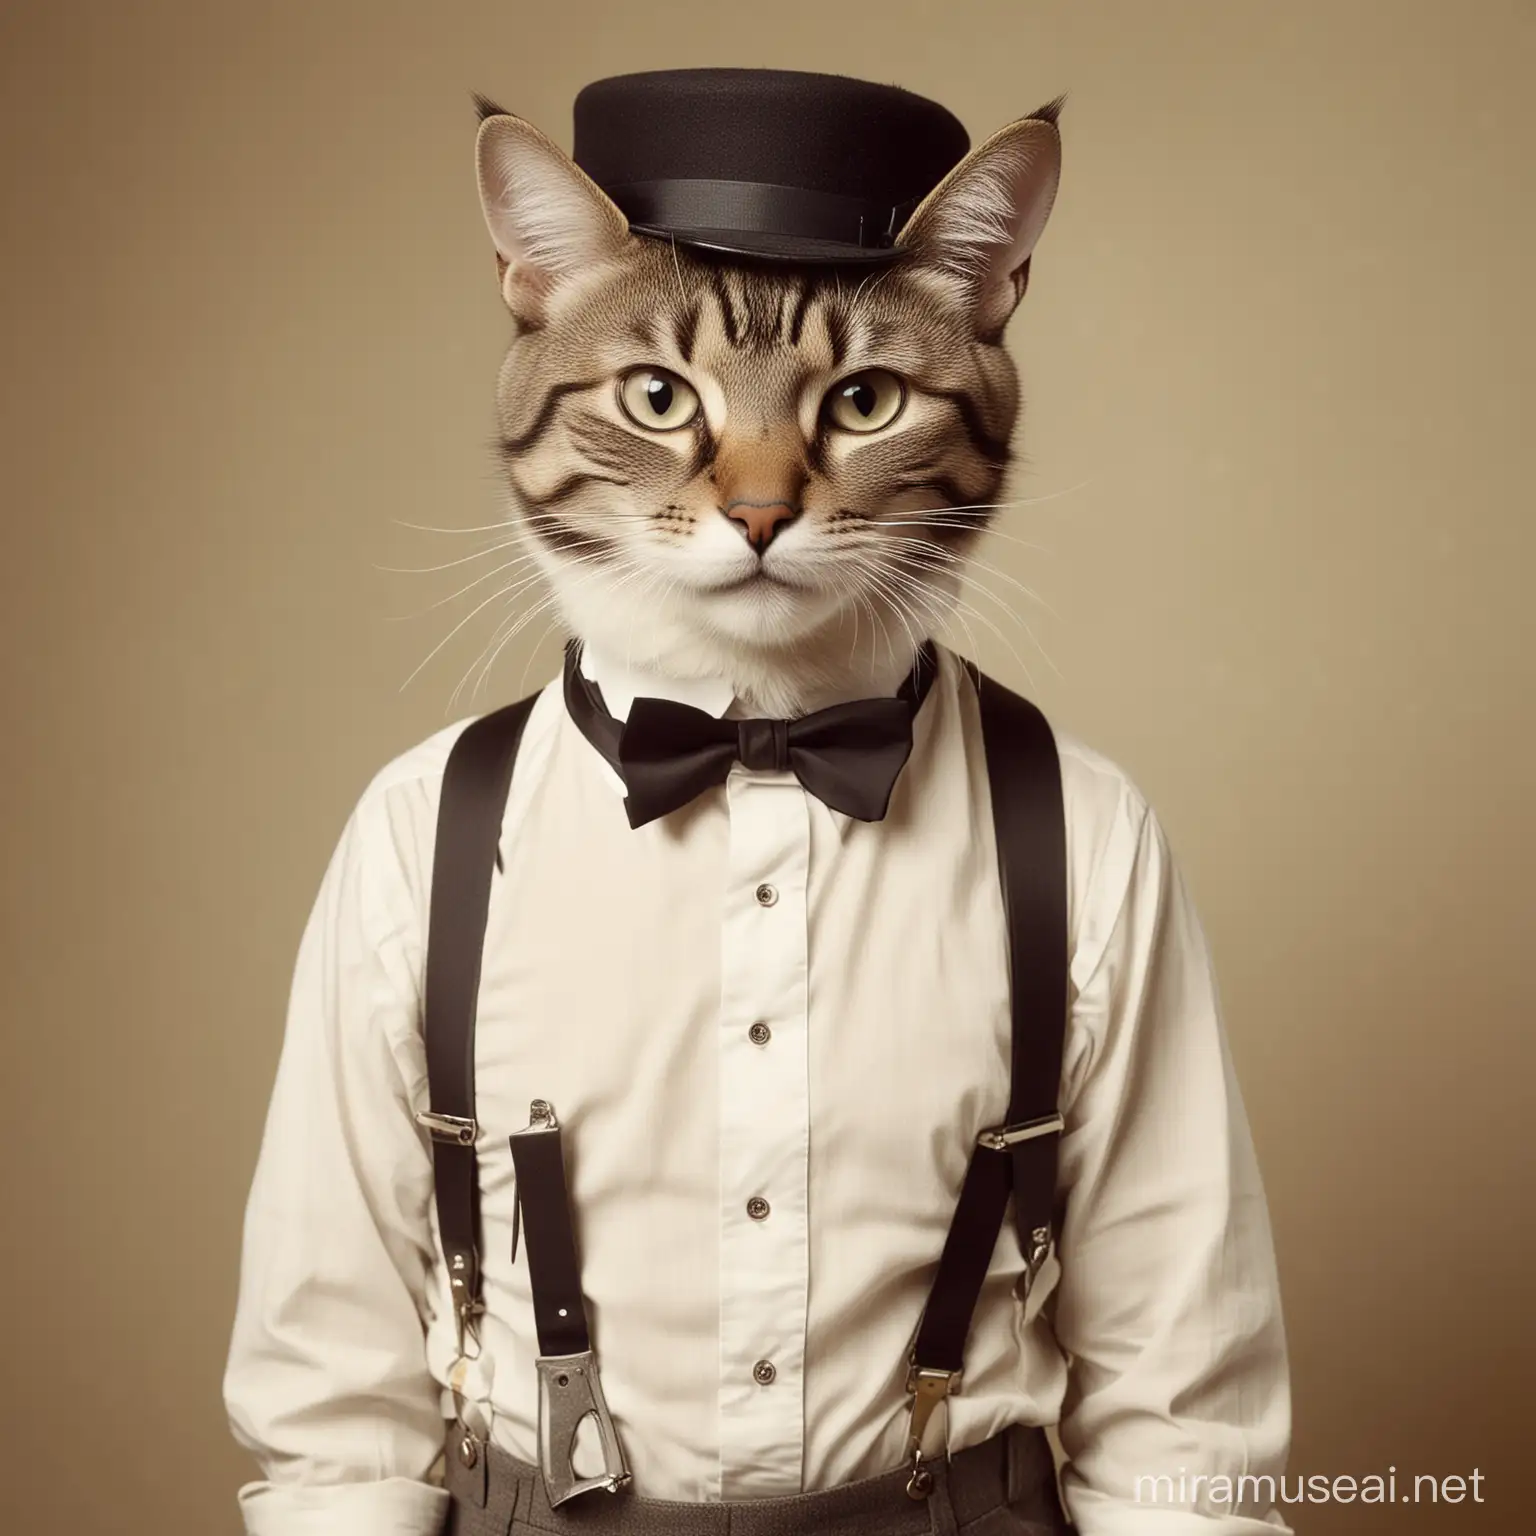 1920s Style Anthropomorphic Cat with Suspenders and Ascot Cap Holding a Knife